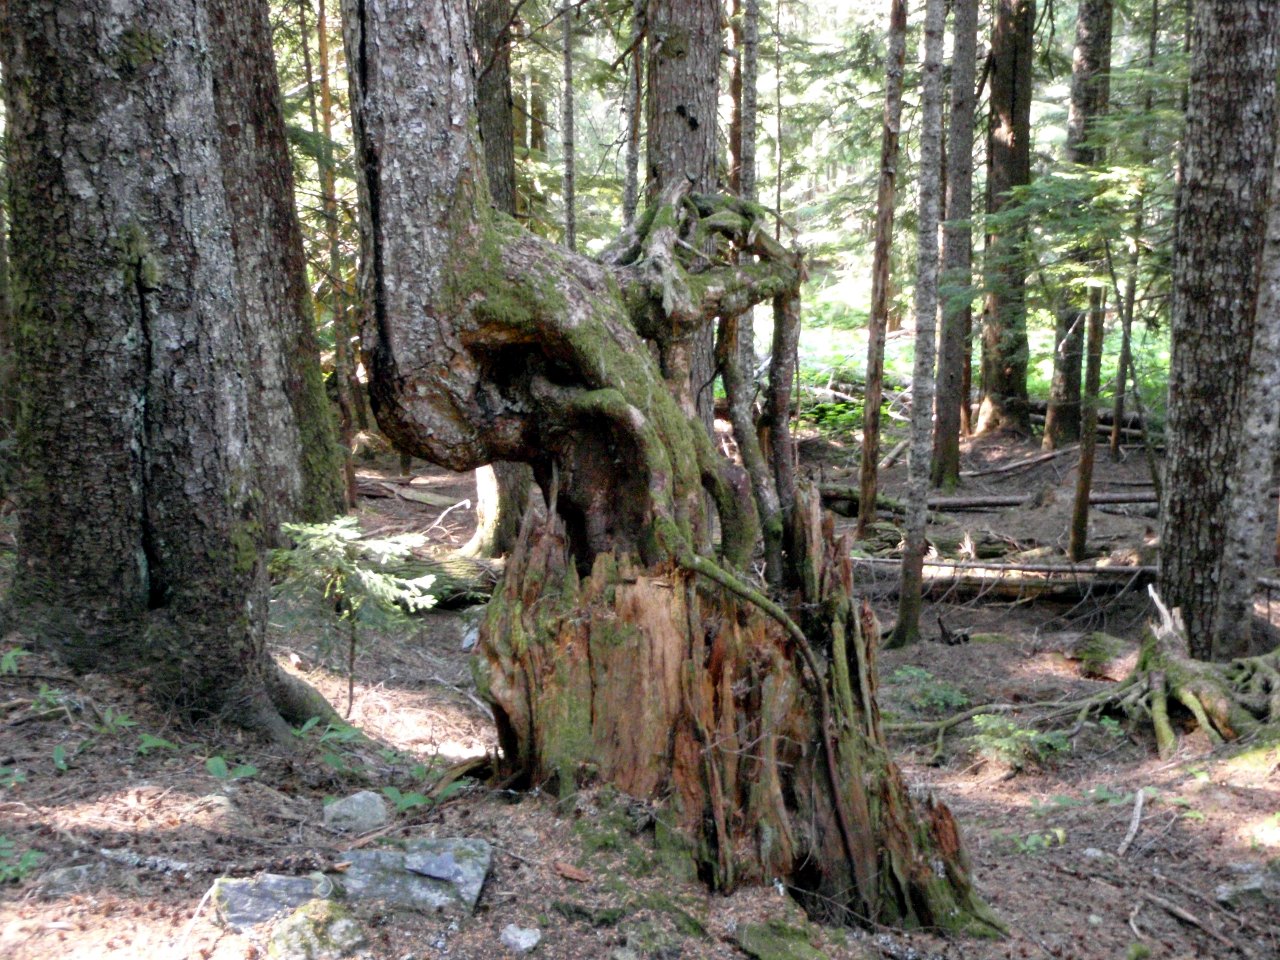 Tree growing on rotted stump